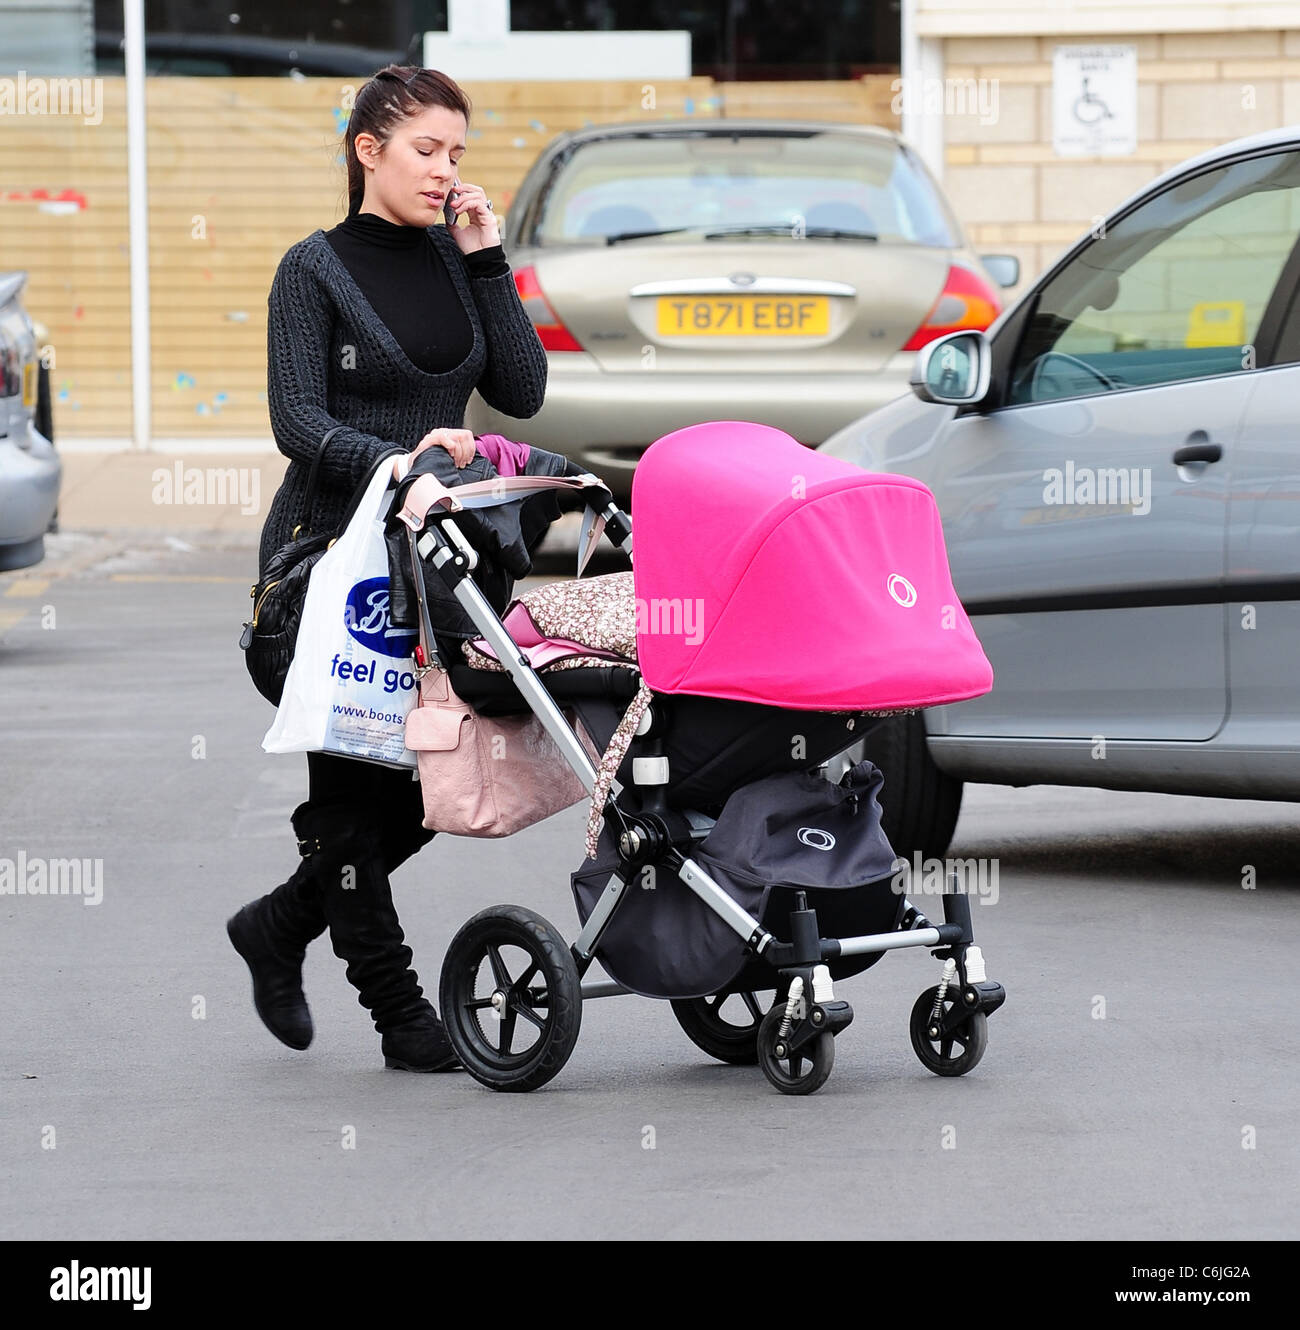 Olalla Torres, wife of Liverpool football player Fernando Torres, out shopping at Speke retail park with their daughter Nora Stock Photo